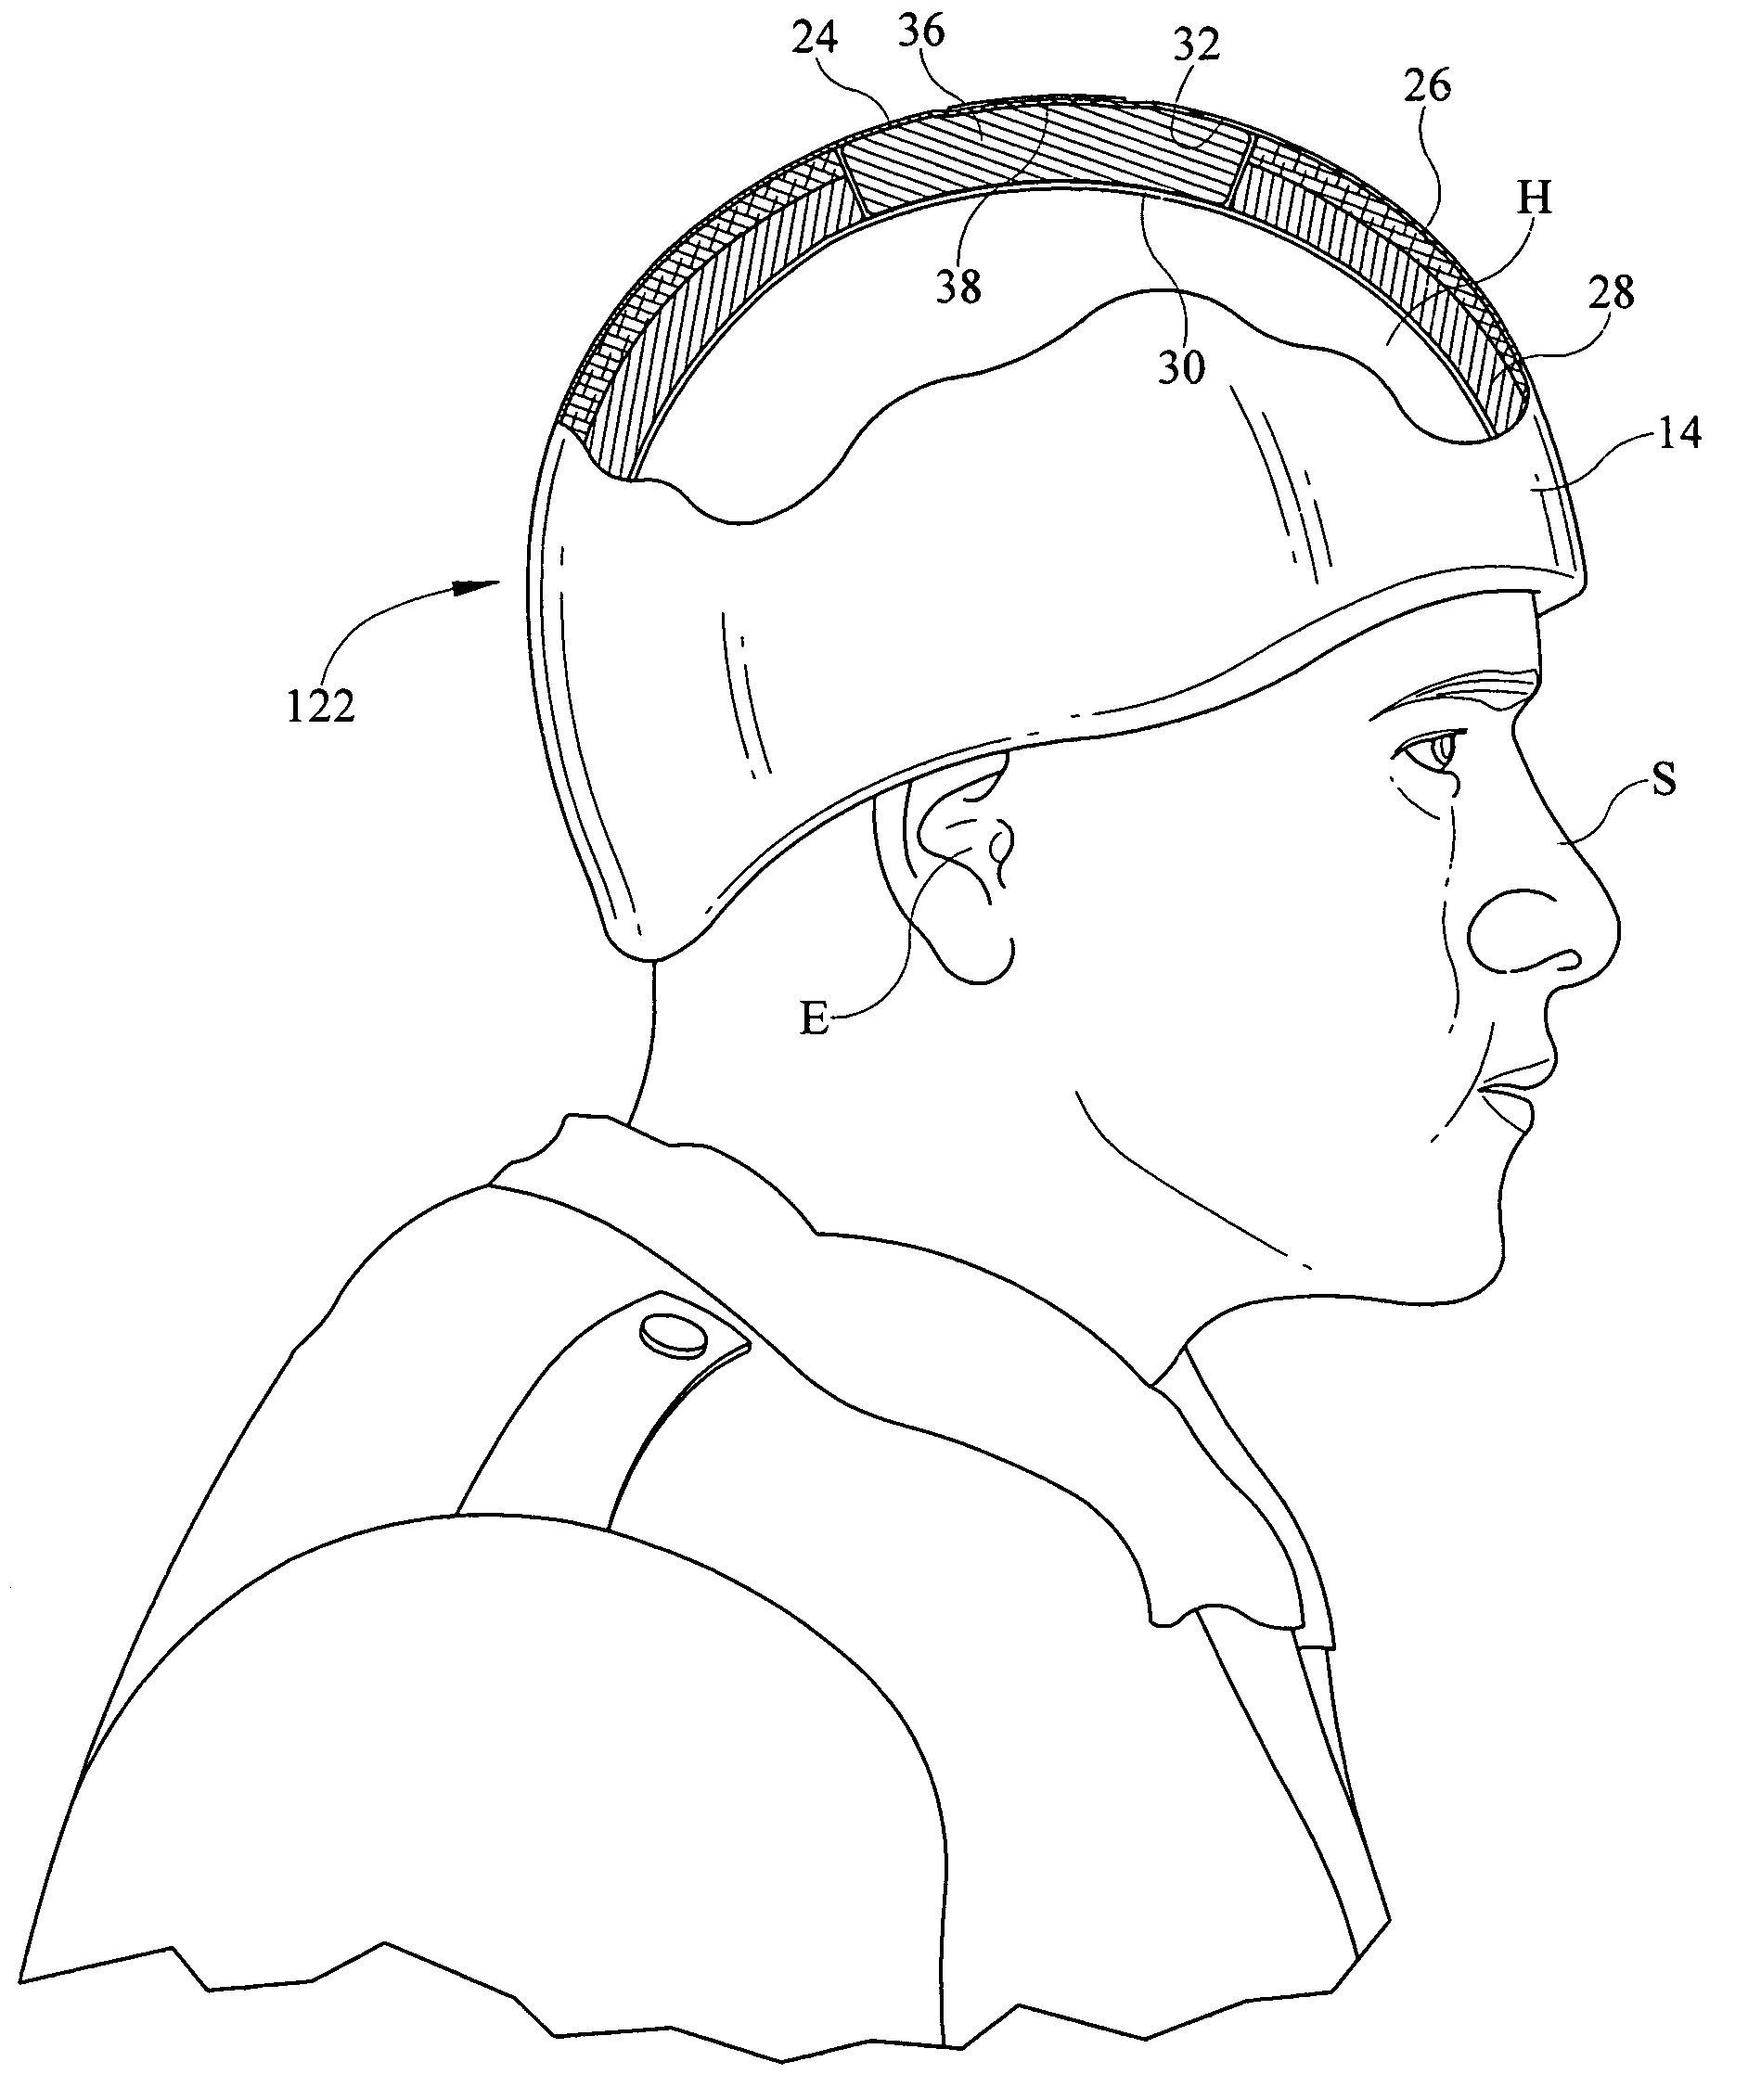 Protective head having impact force distribution